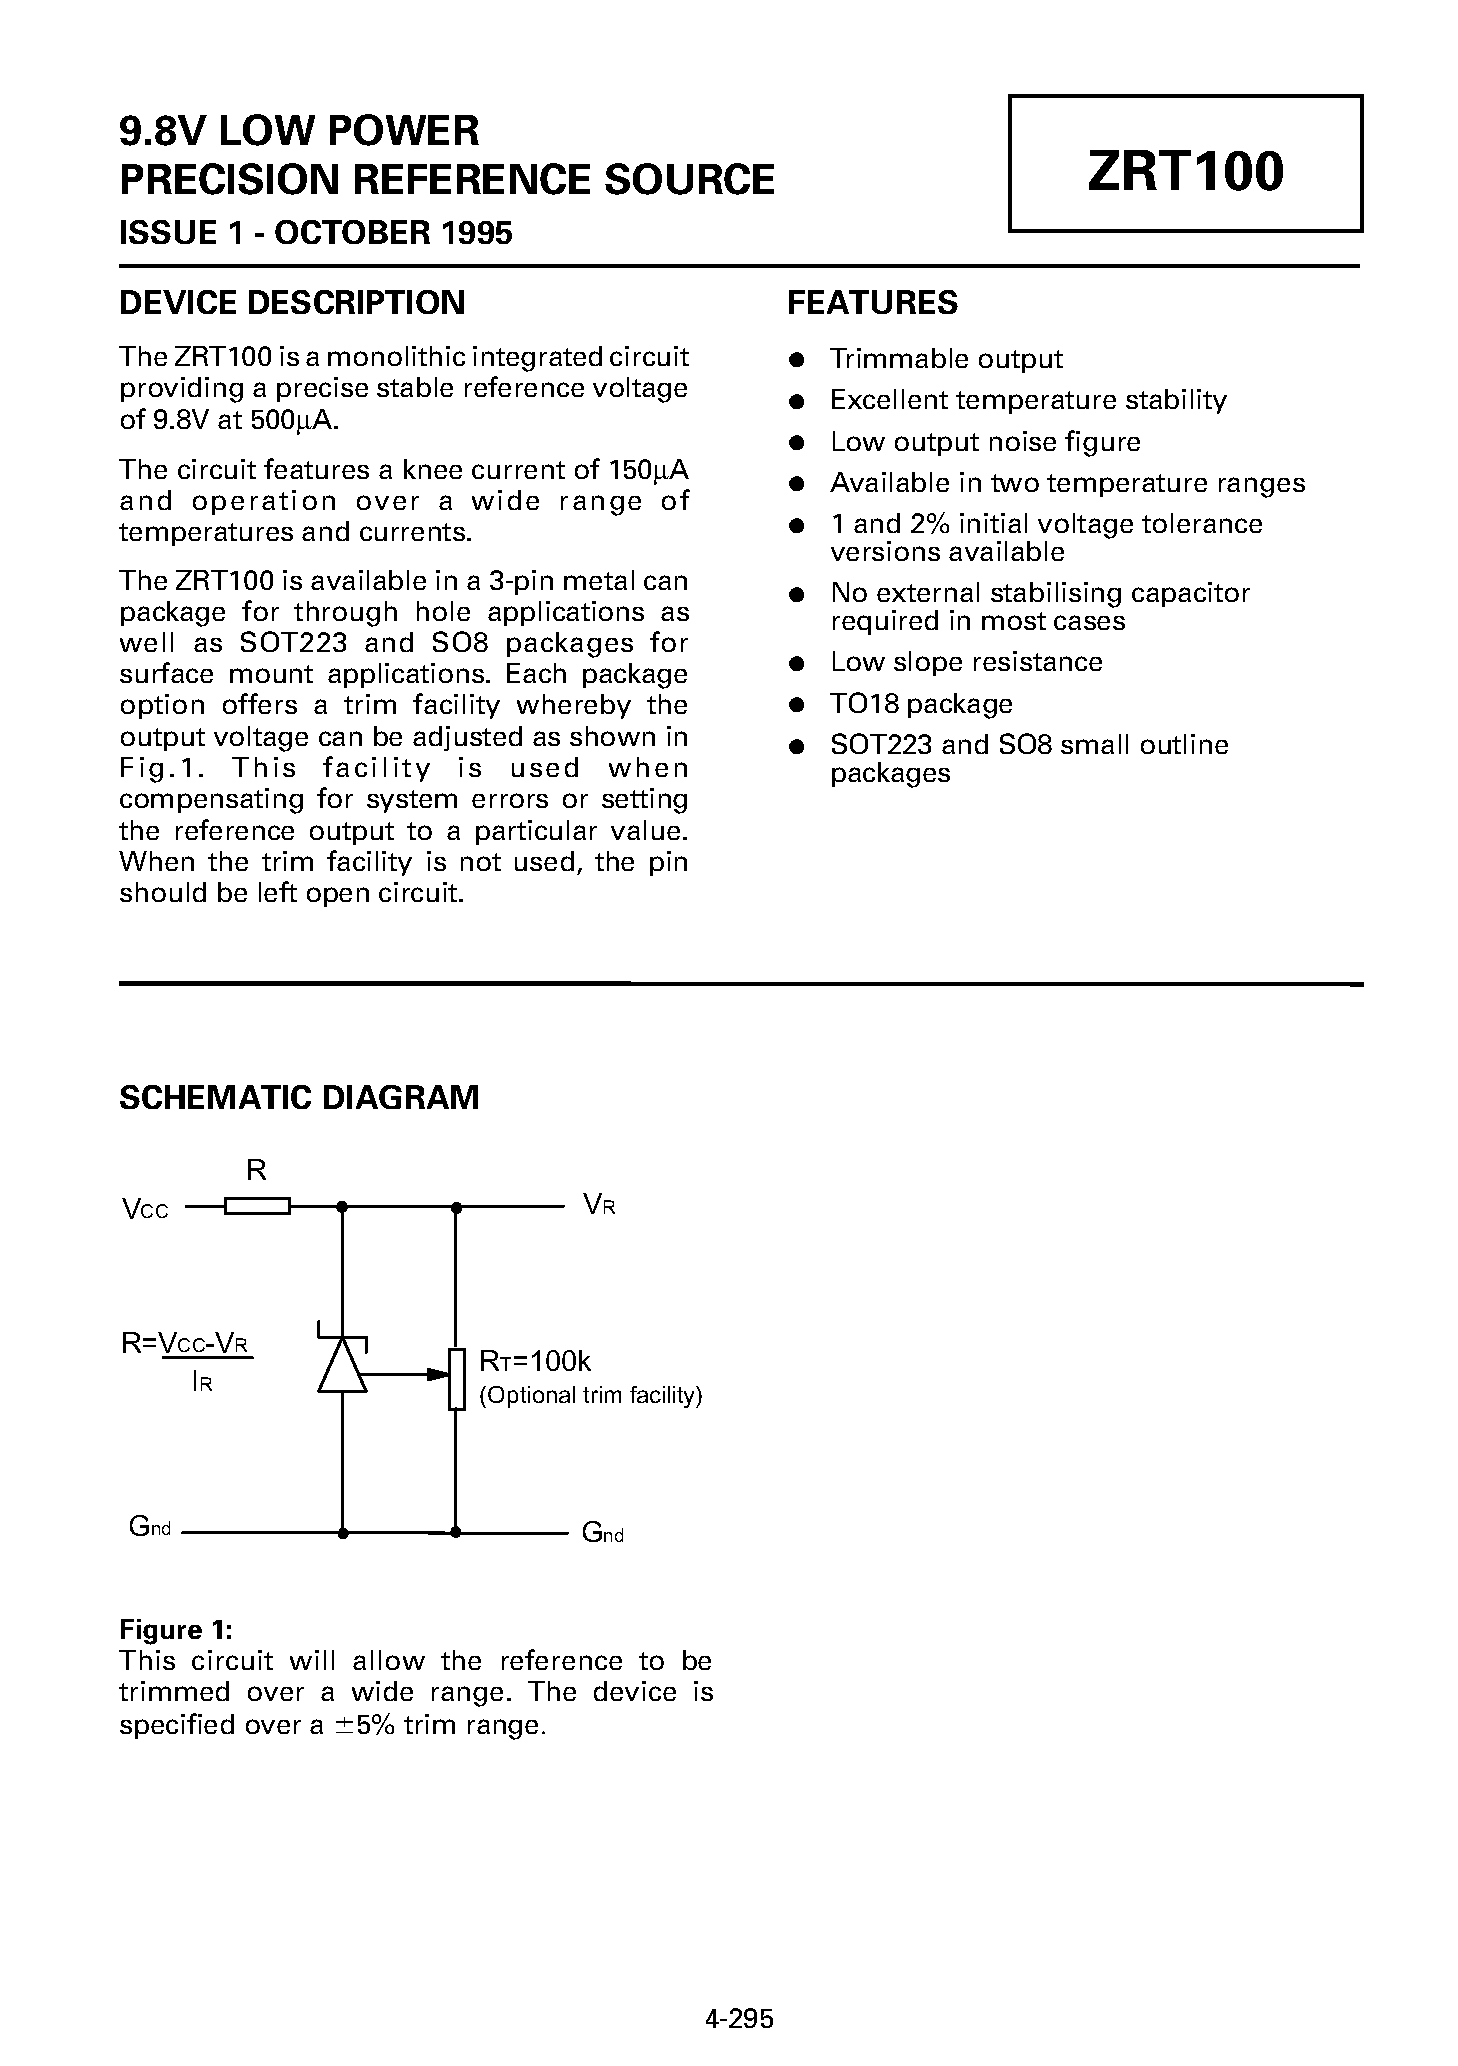 Datasheet ZRT100GC1 - 9.8V LOW POWER PRECISION REFERENCE SOURCE page 1